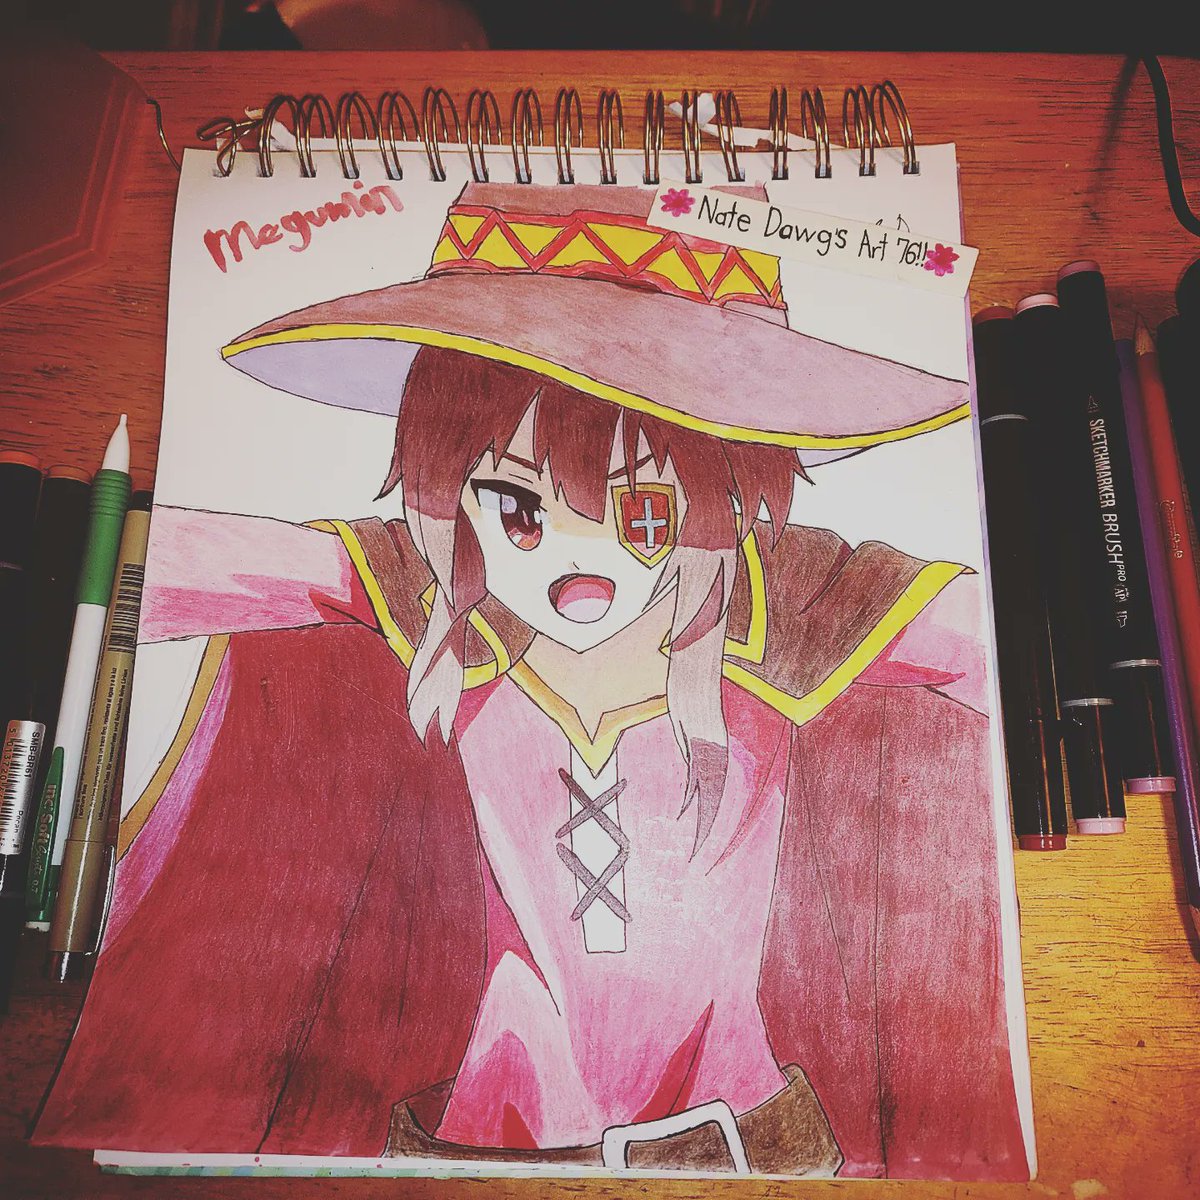 What do you guys think of my megumin from konosuba drawing. Plz let me know what you guys think I've been watching alot of tutorials on how to draw better. So I hope this is improvement. #megumin #konosuba #drawing #meguminkonosuba #ArtistOnTwitter #MyArt #artwork #cuteart